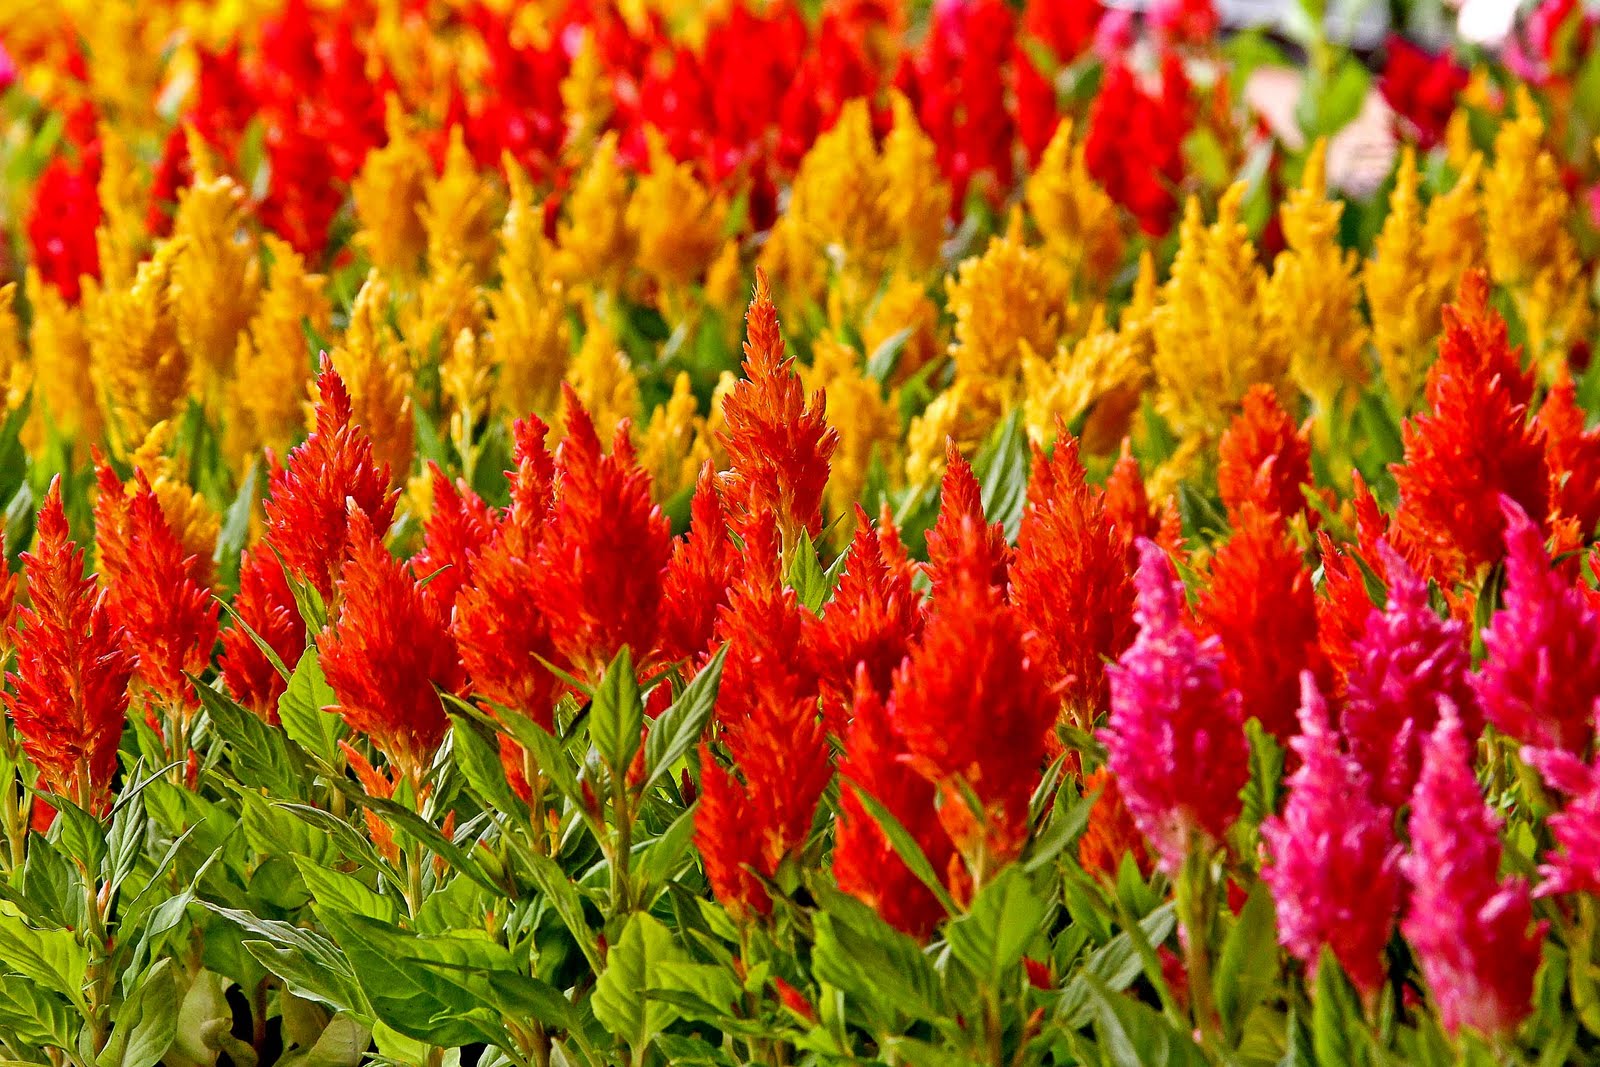 Photos by Stan: Celosia [Today's Flowers]